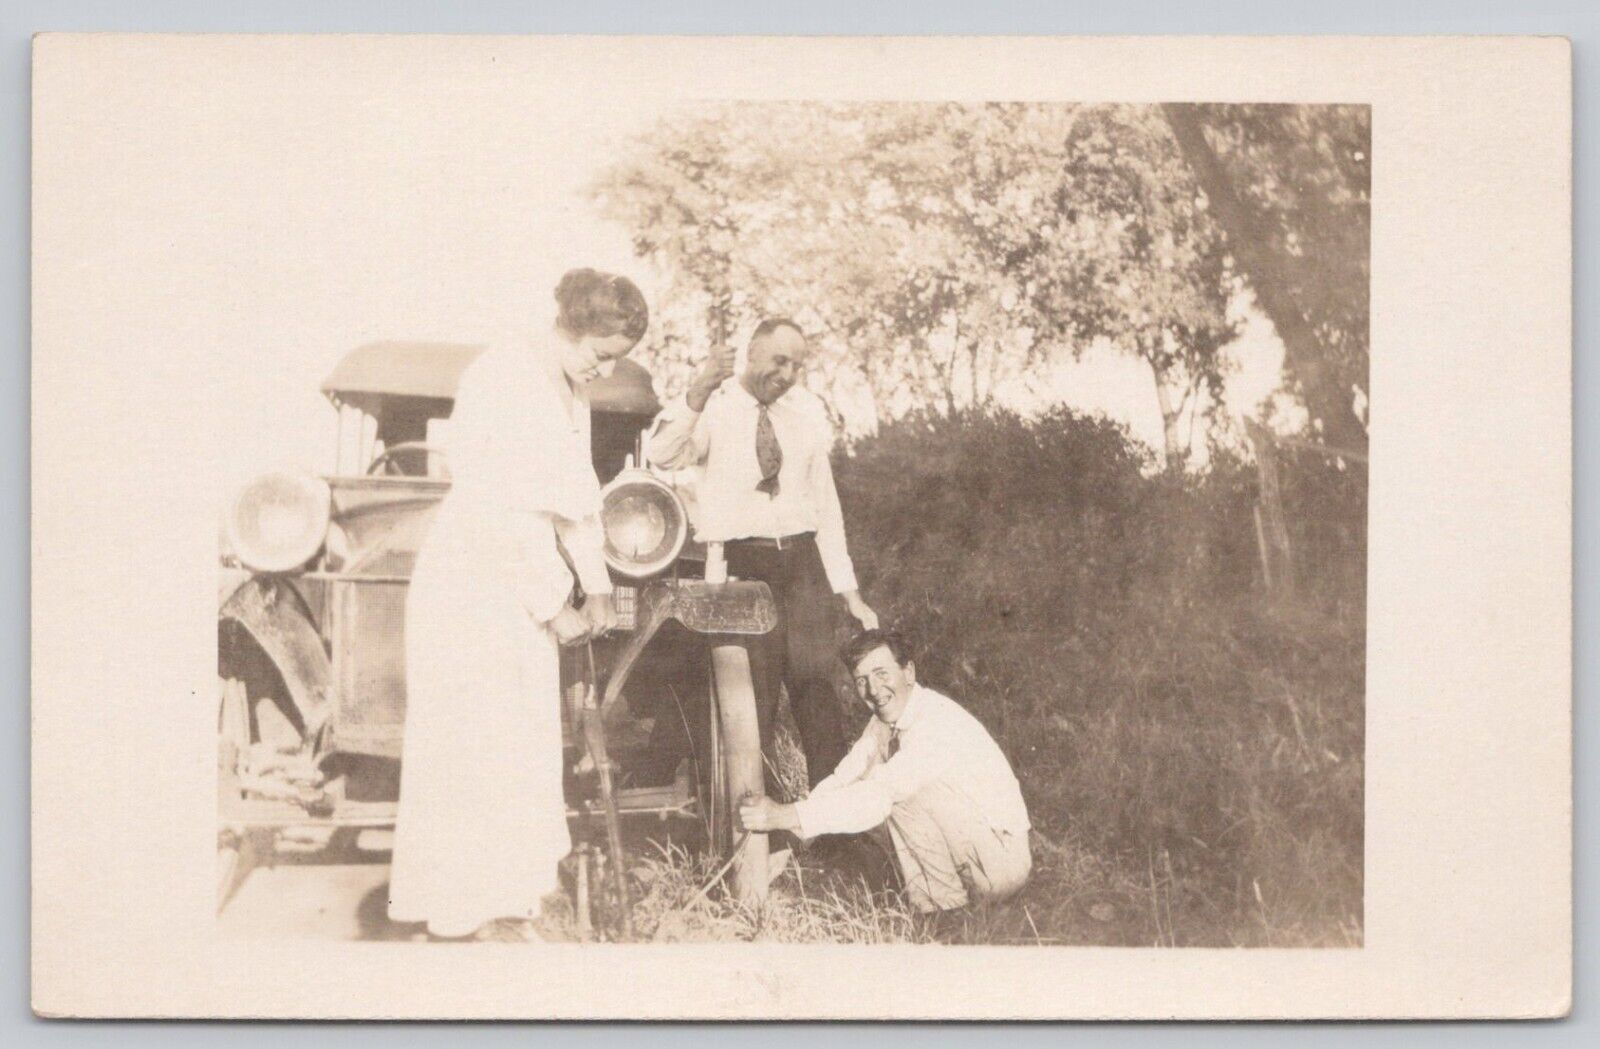 RPPC Postcard Men Changing Tire On Vintage Car Woman Helping Lift Car Real Photo